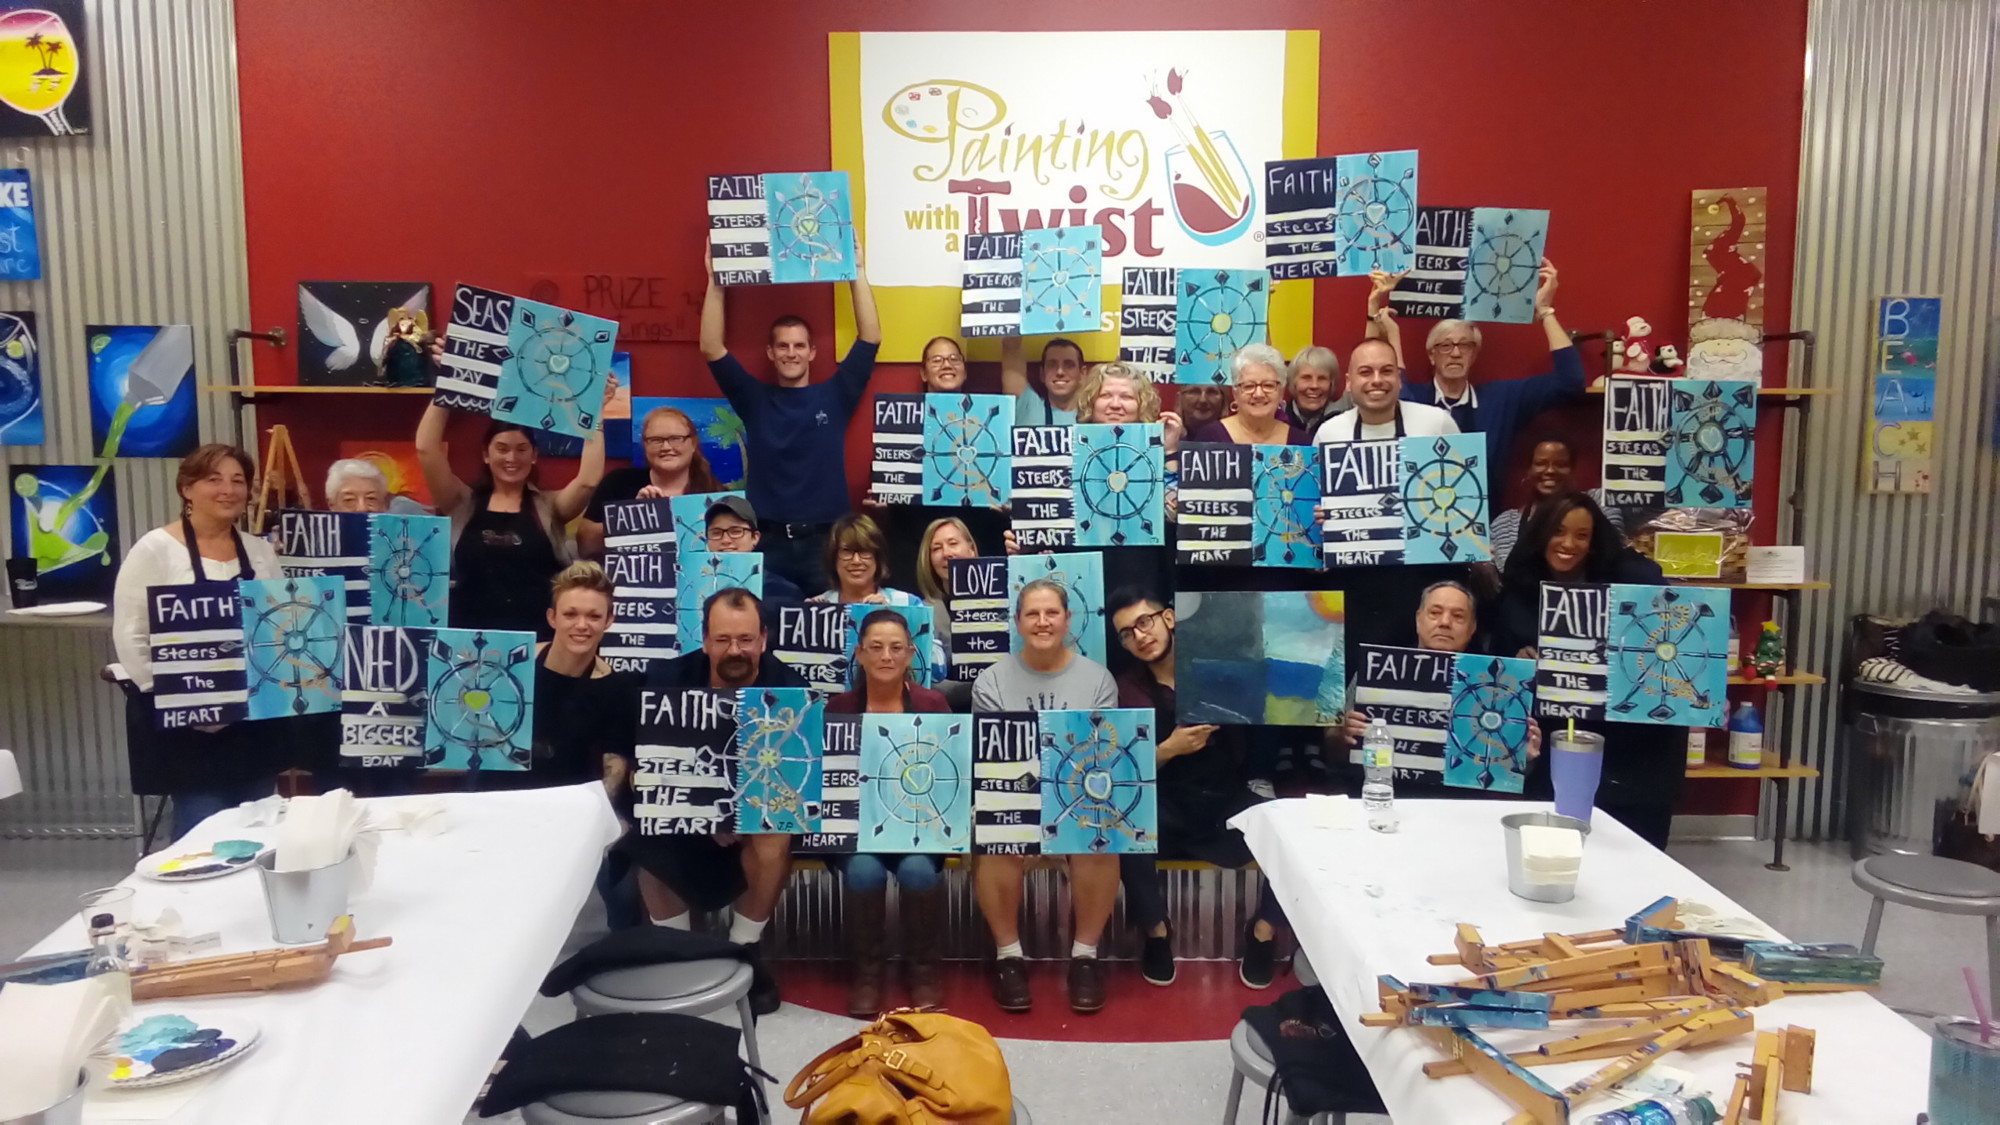 Painting with a twist raised $500 for Grace Community Food Pantry during 